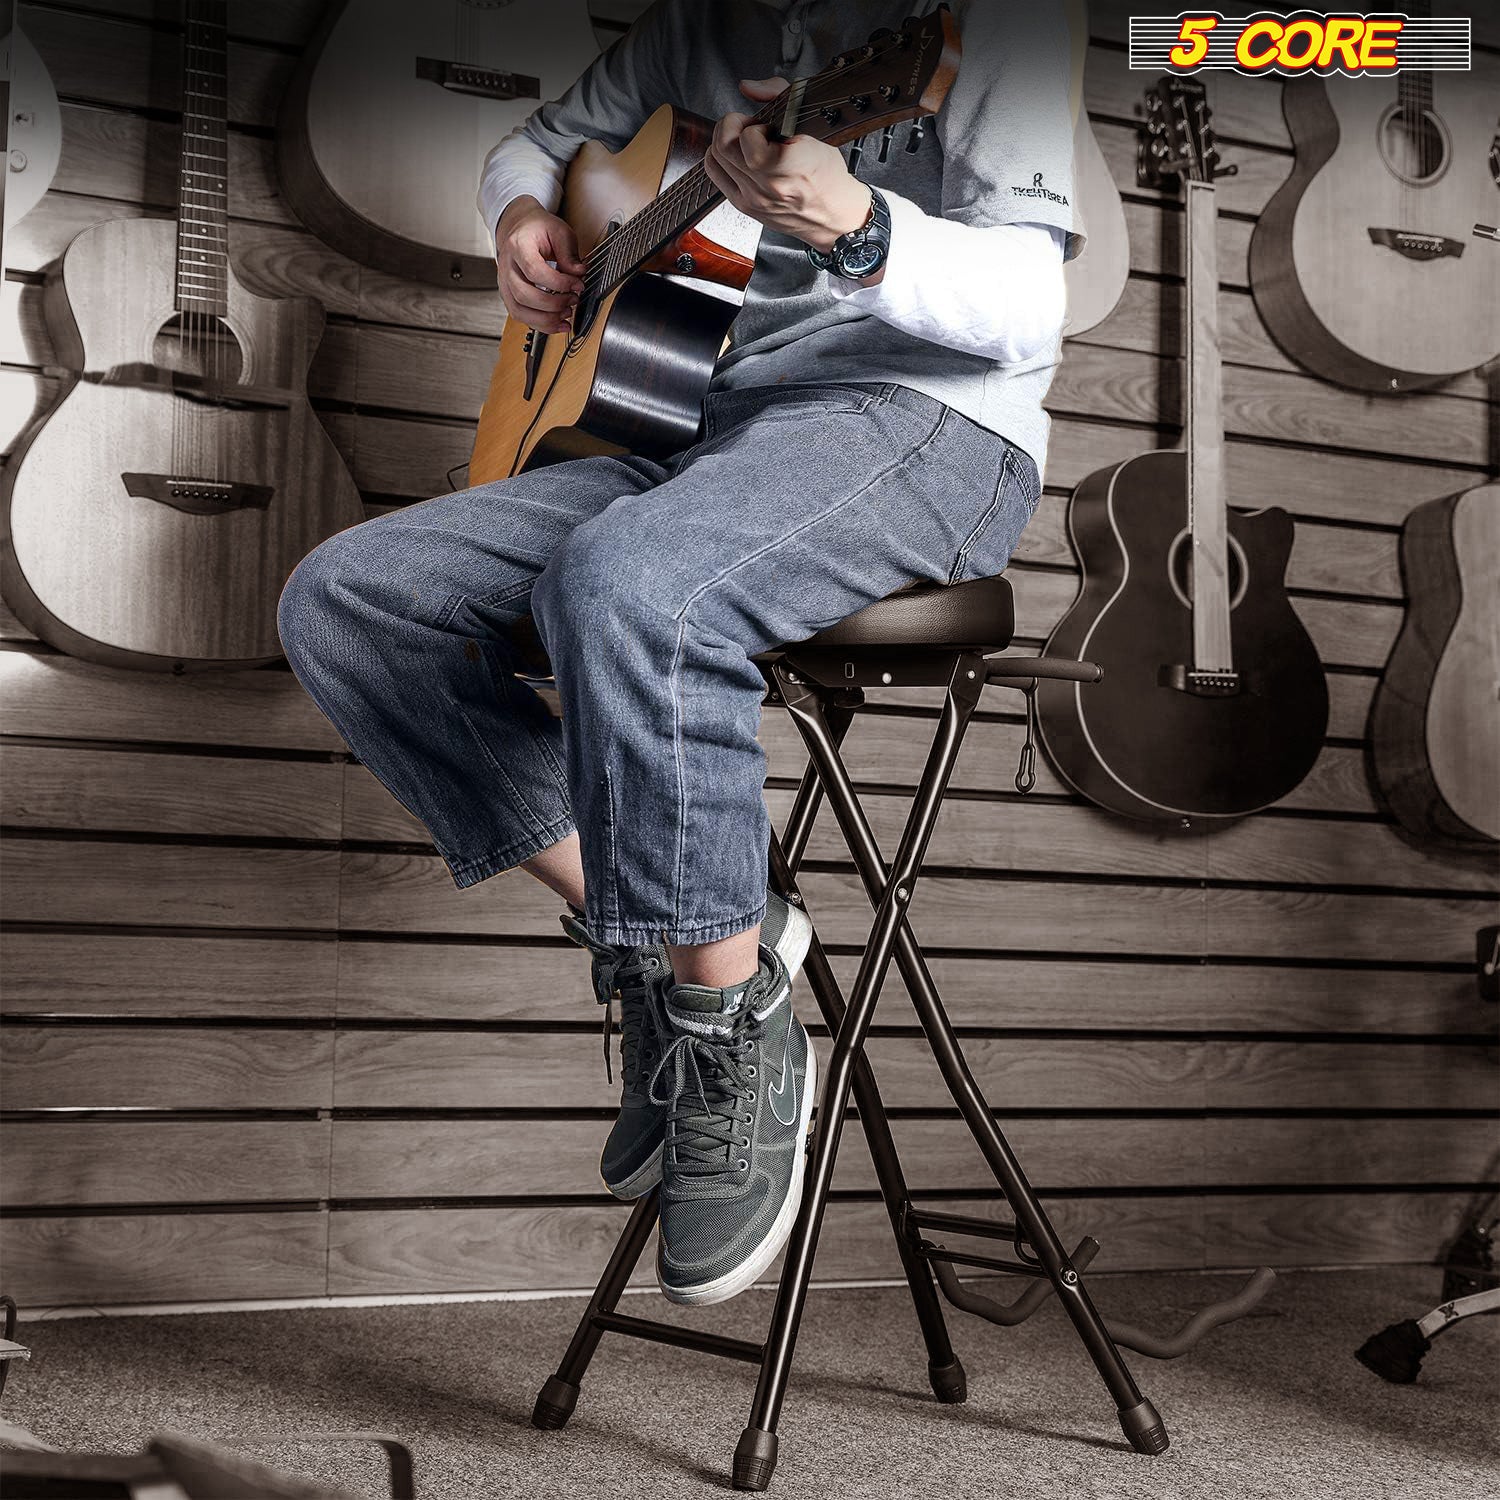 Enjoy Hours of Playing with Comfortable Guitar Seating